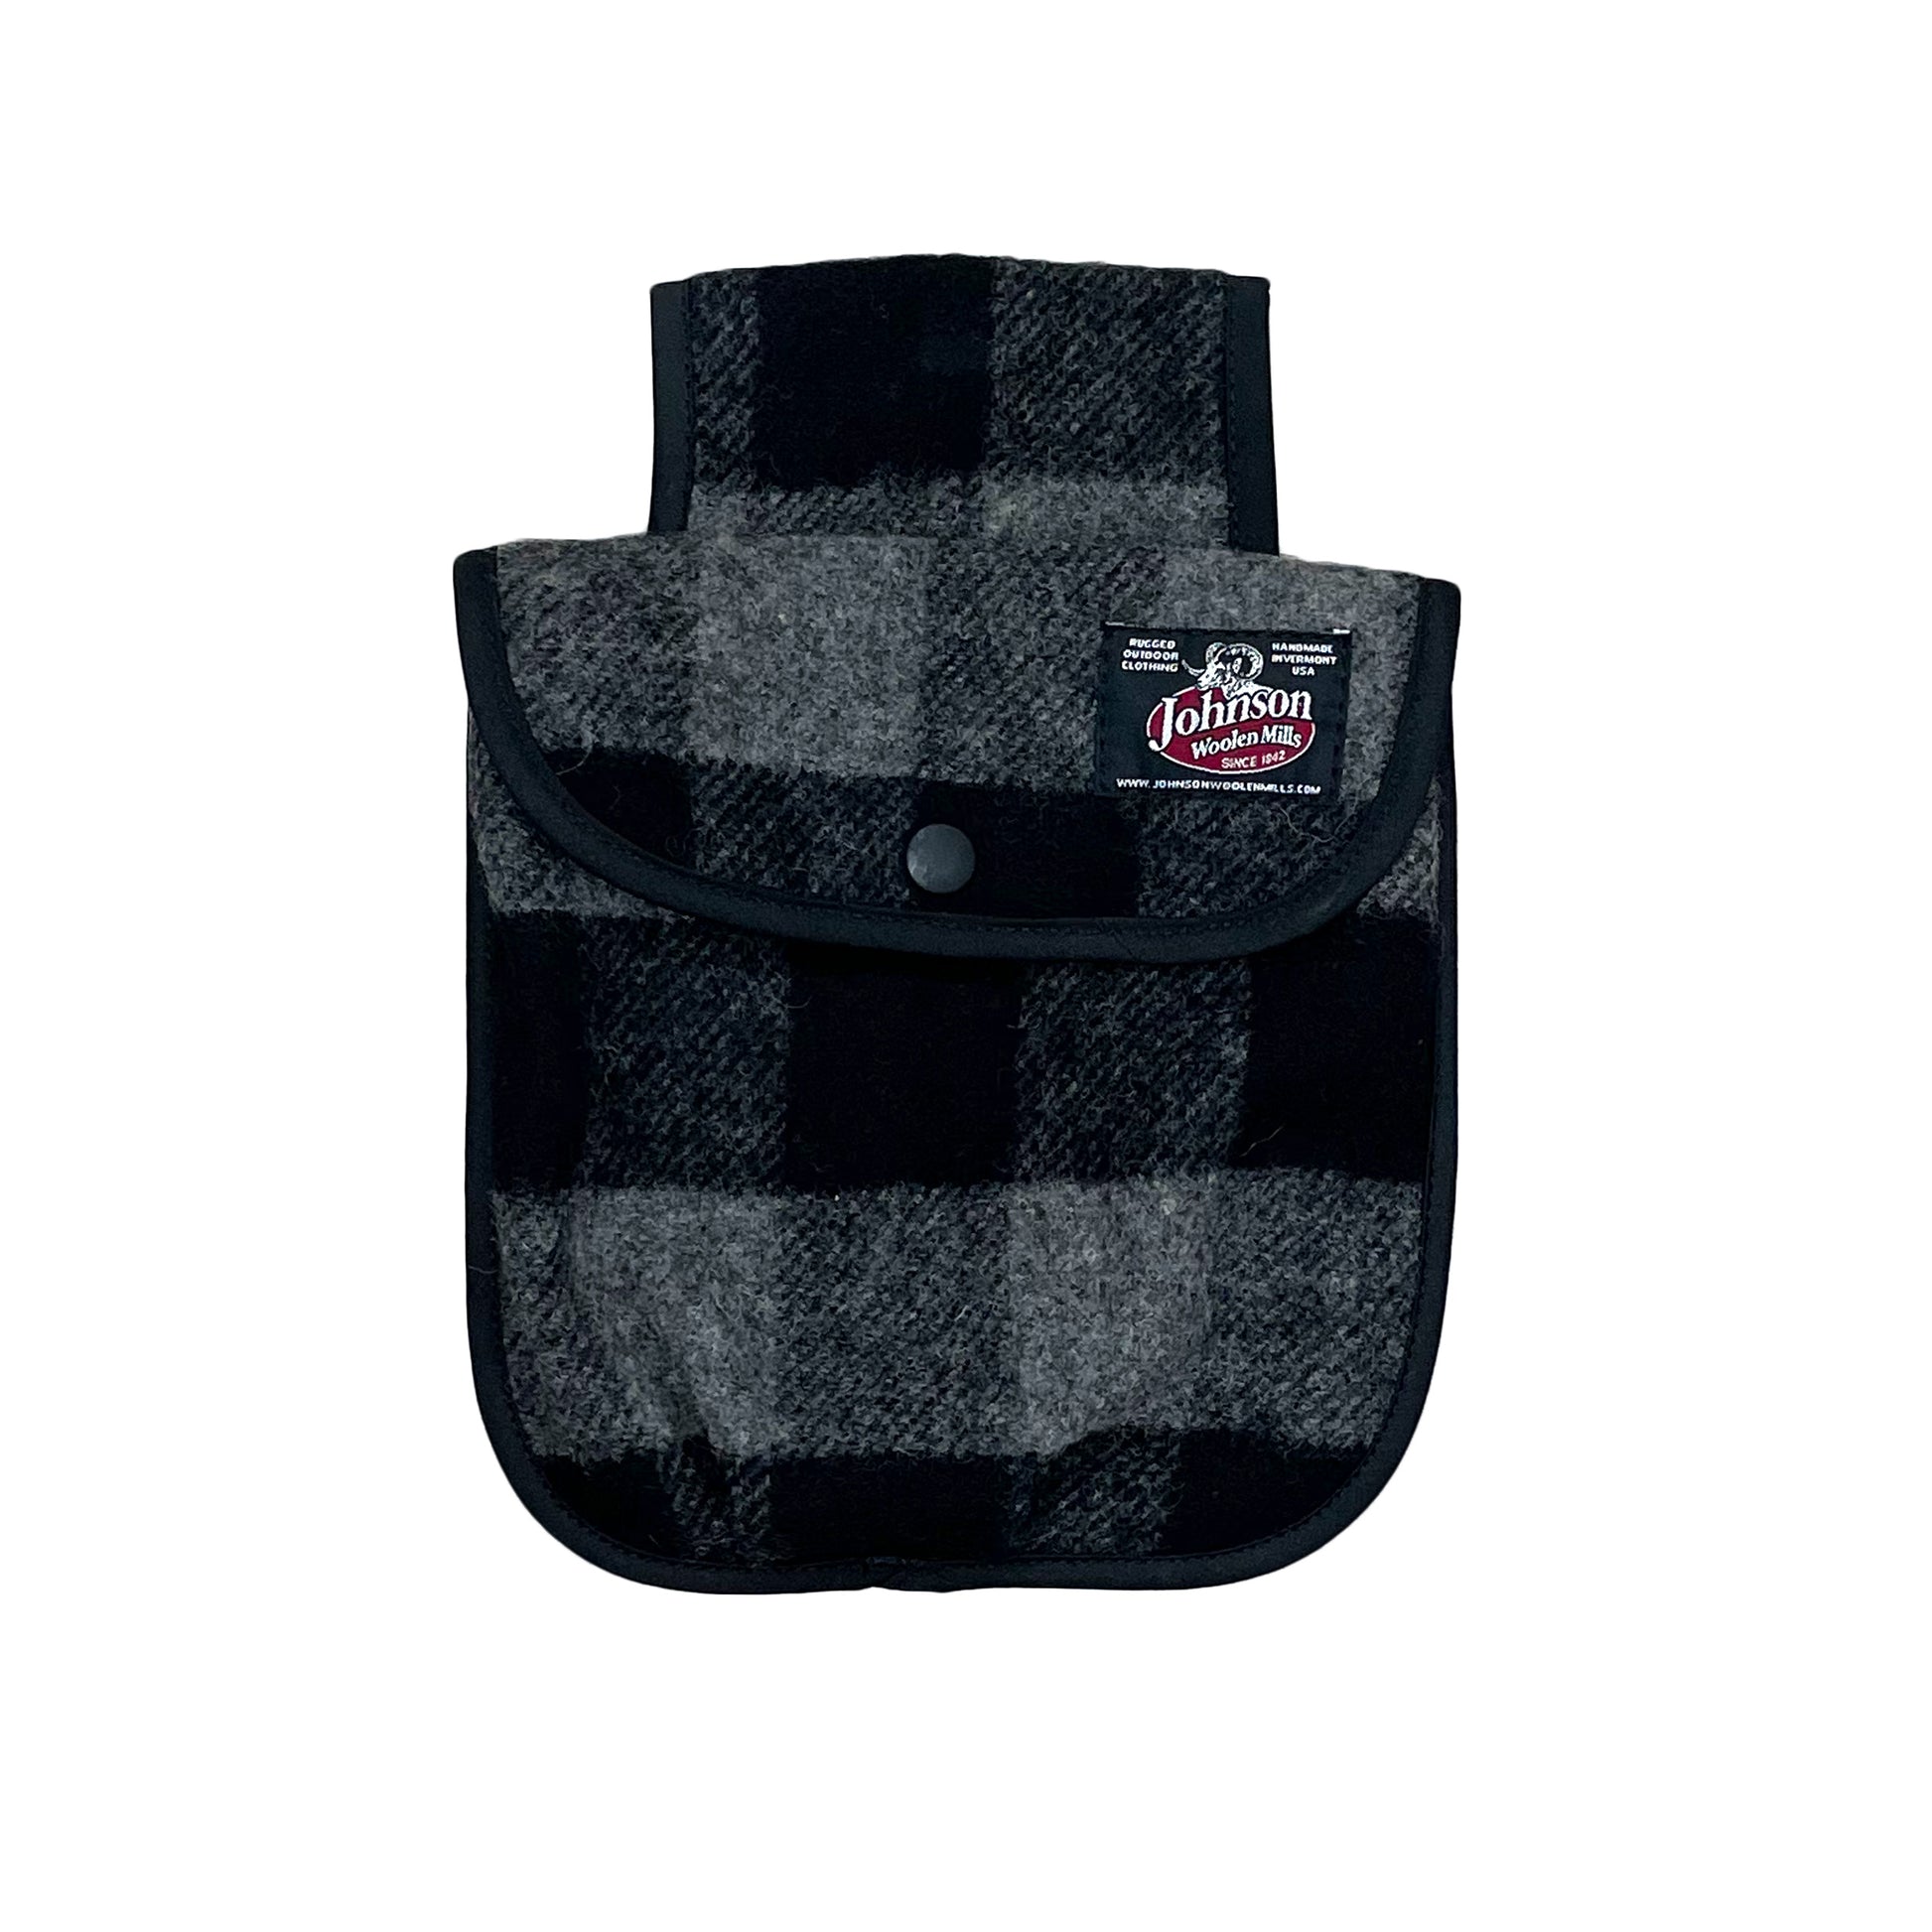 Black and gray hunting pouch